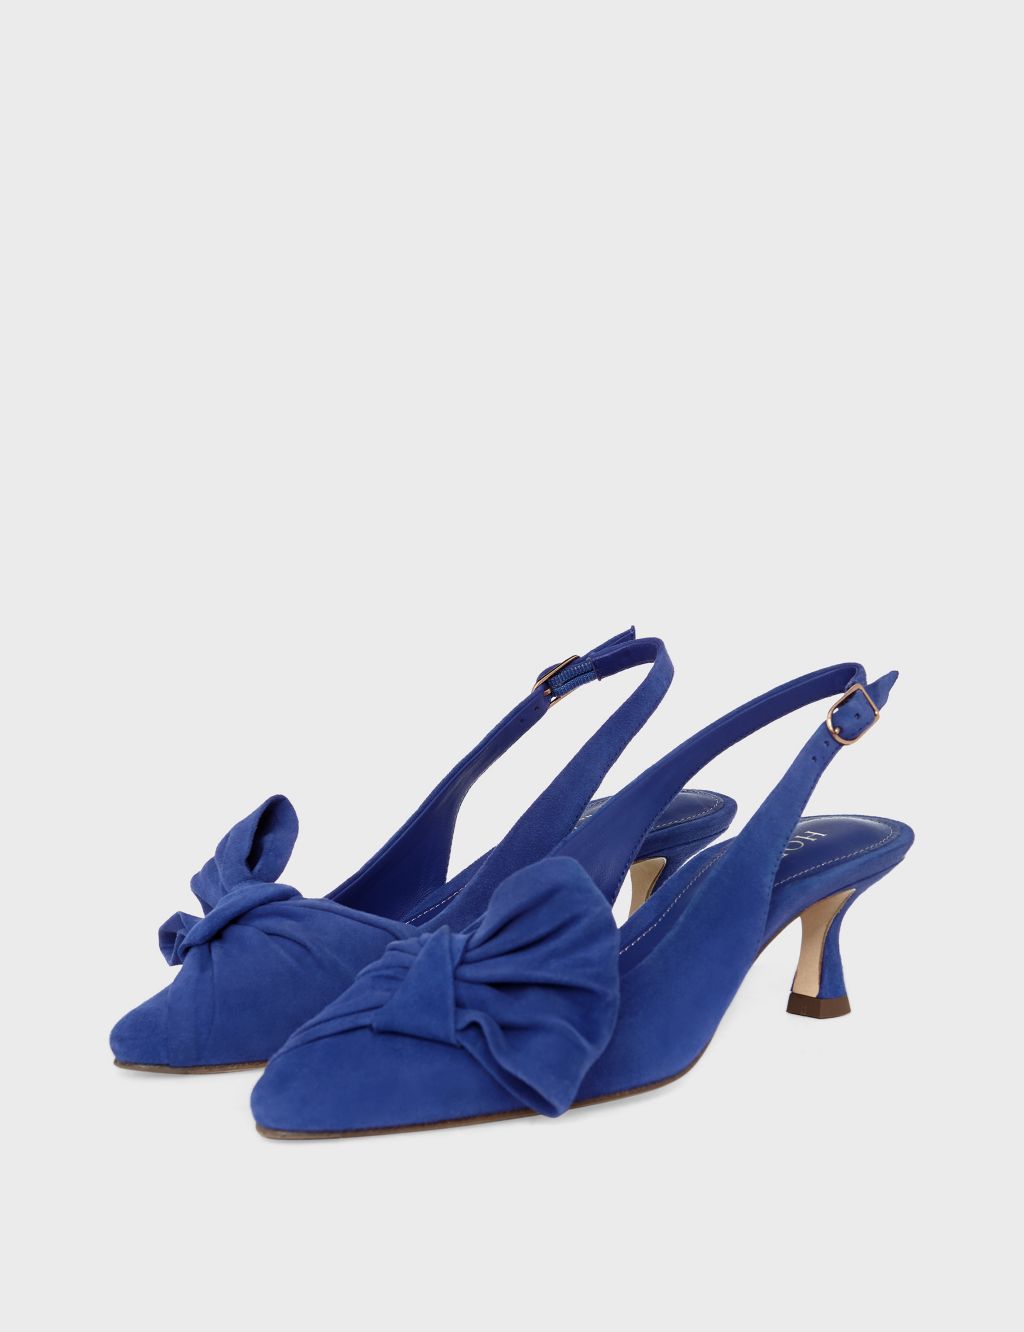 Suede Bow Kitten Heel Slingback Shoes image 2